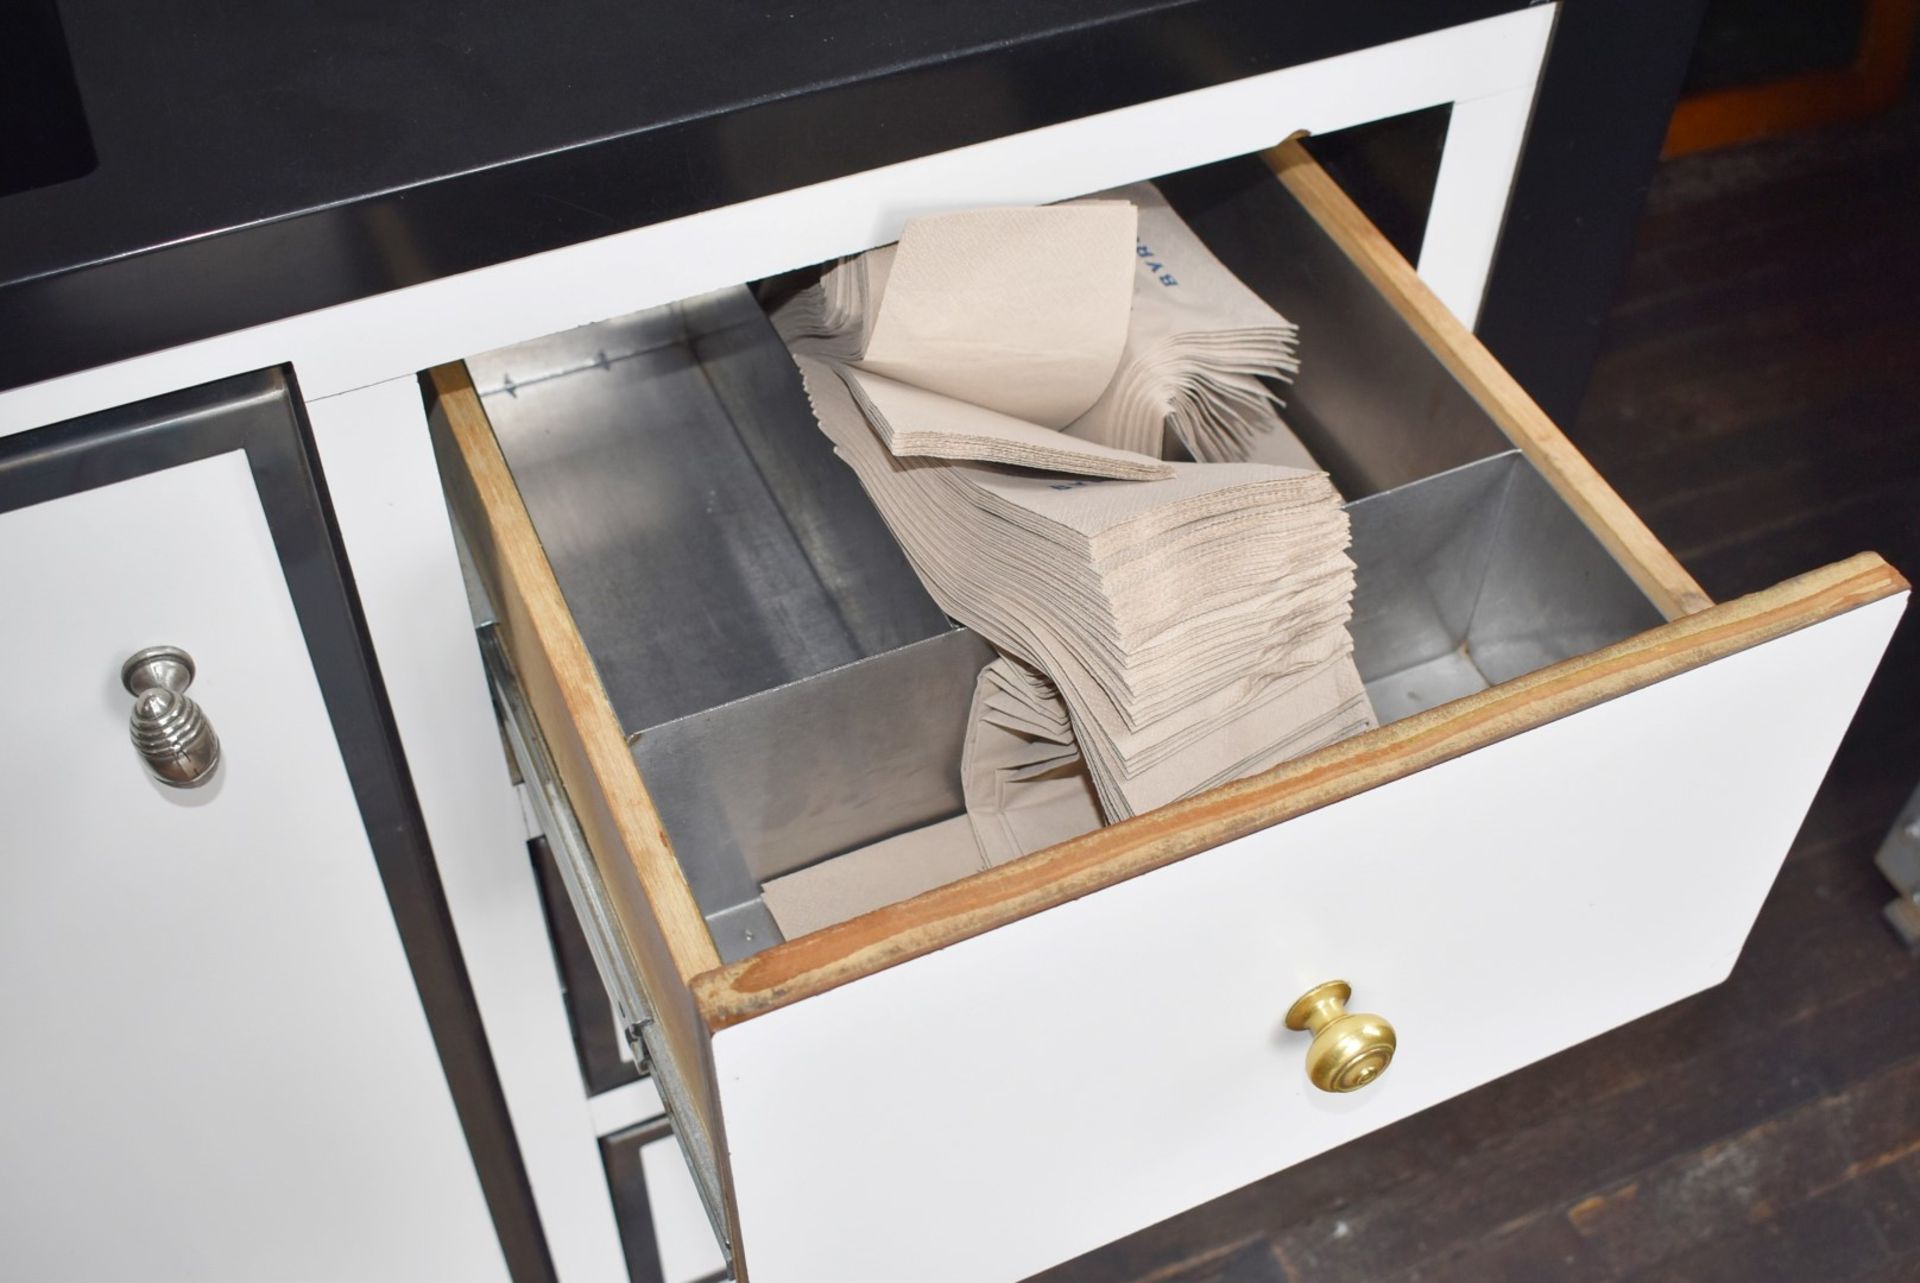 1 x Restaurant Dumbwaiter Station - Features a Solid Worksurface With Bin Chute and Storage - Image 5 of 5